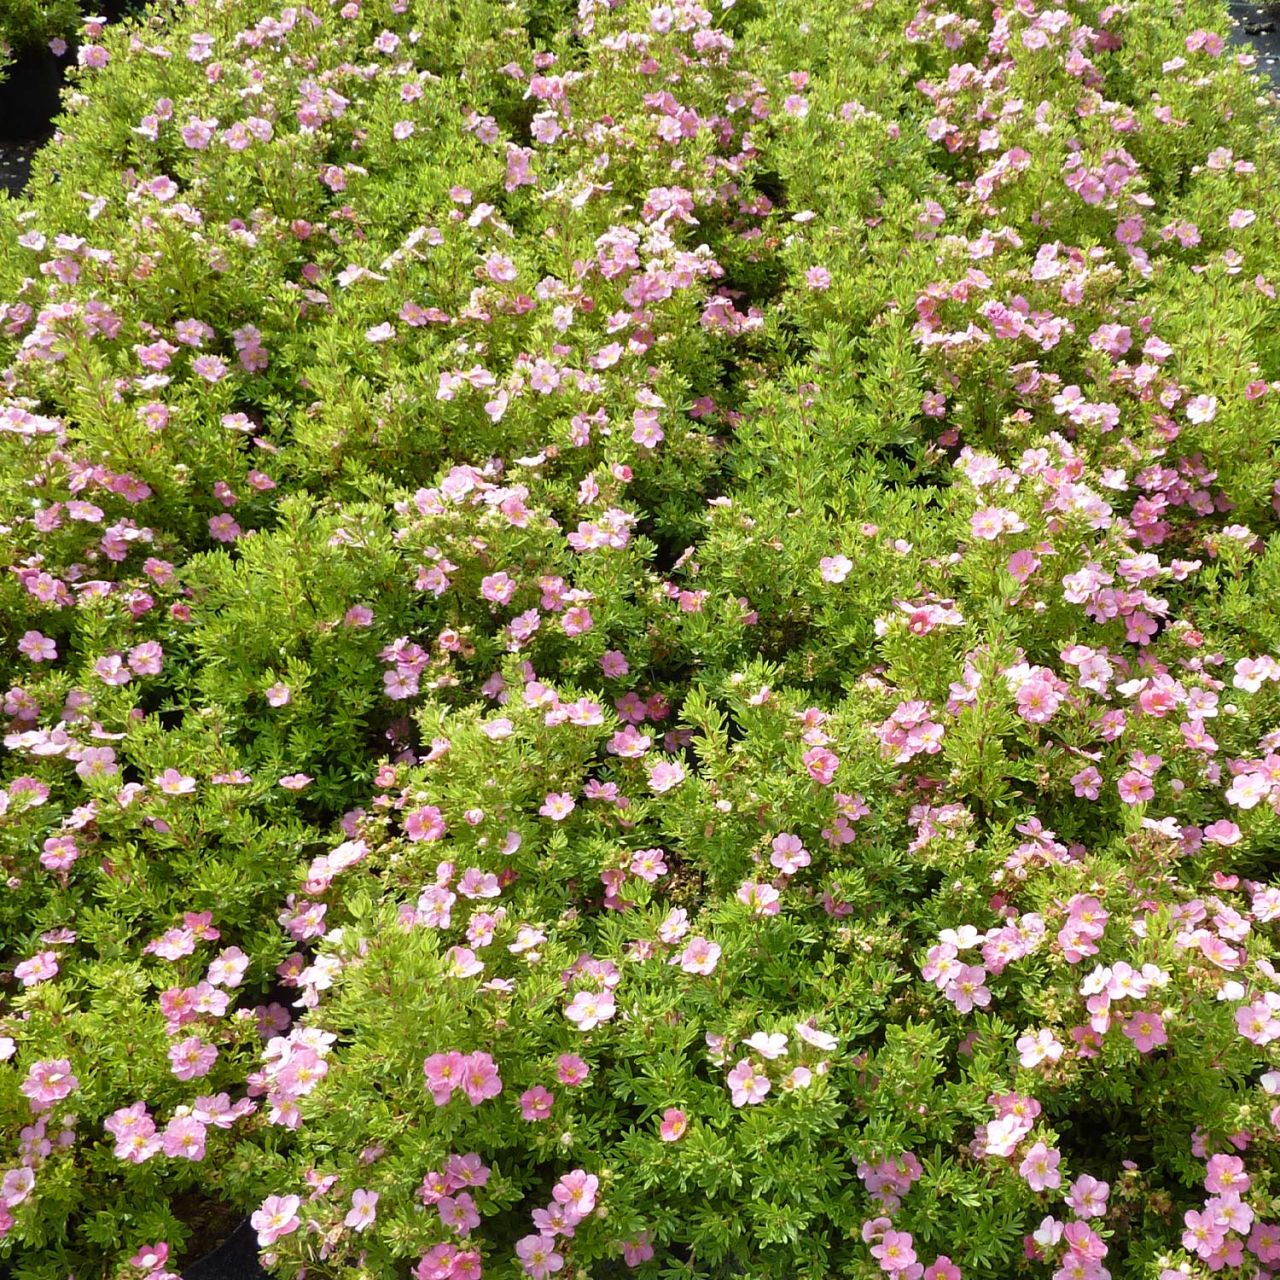  Fingerstrauch 'Lovely Pink®' ('Pink Beauty') - Potentilla 'Lovely Pink'